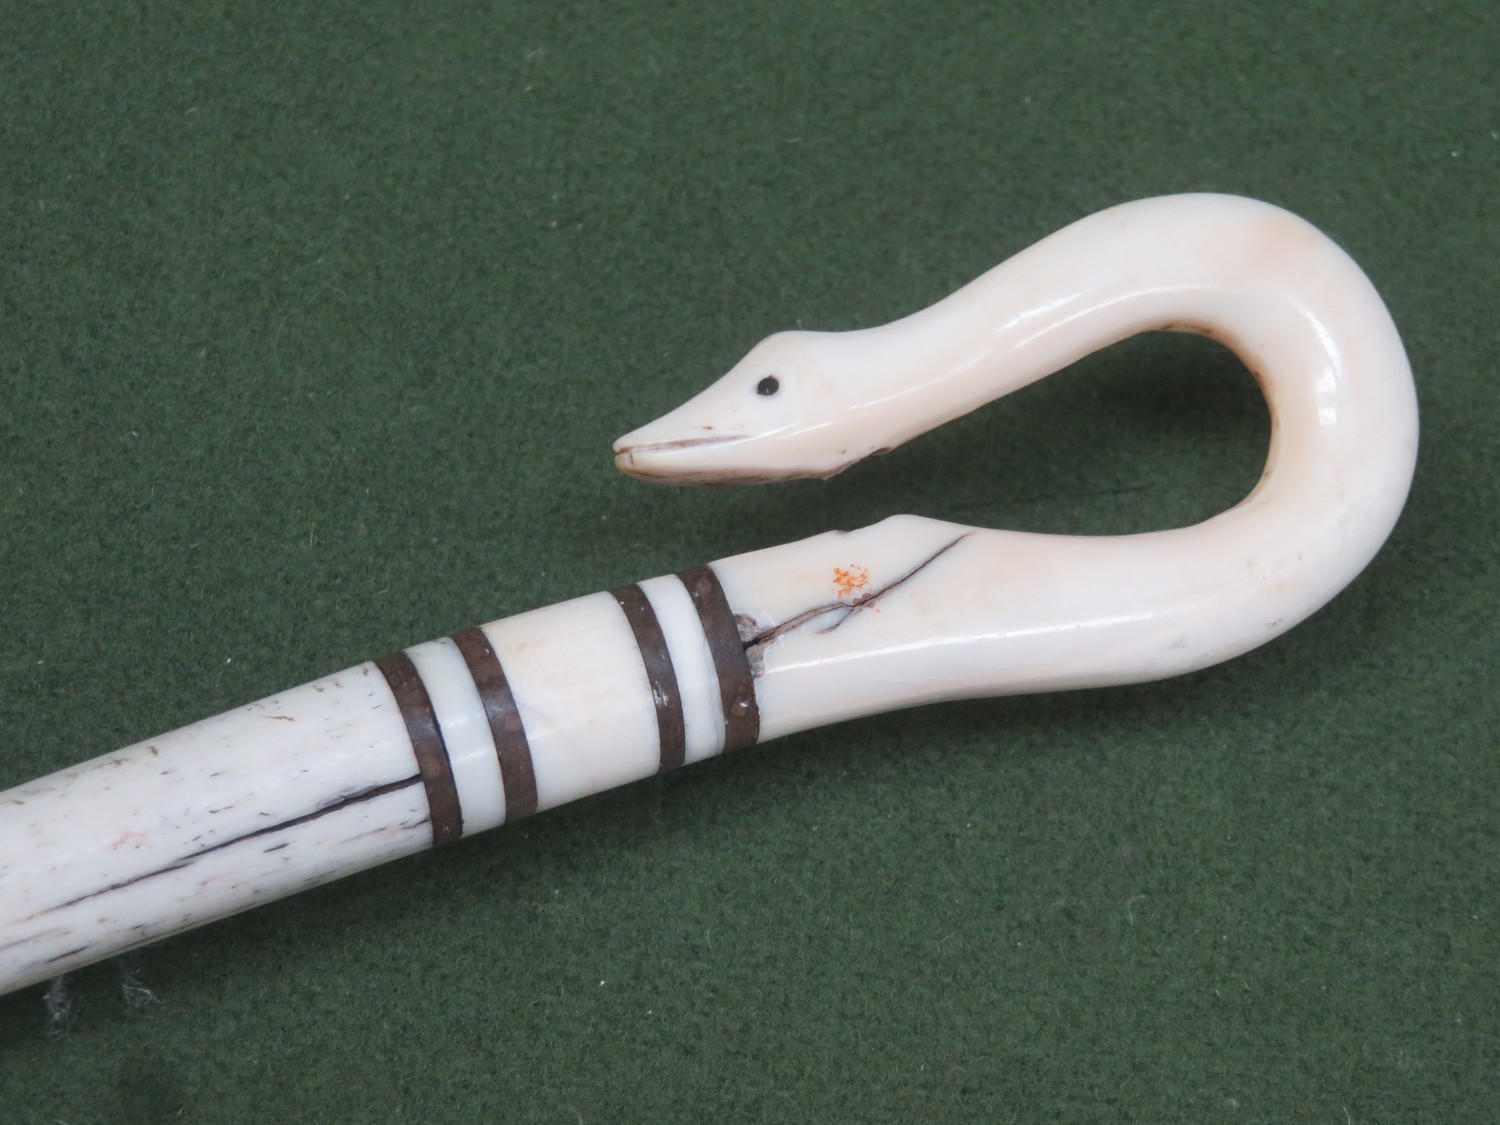 18th century speckled whale bone turned walking stick, with hand carved ivory serpent form handle. - Image 2 of 3